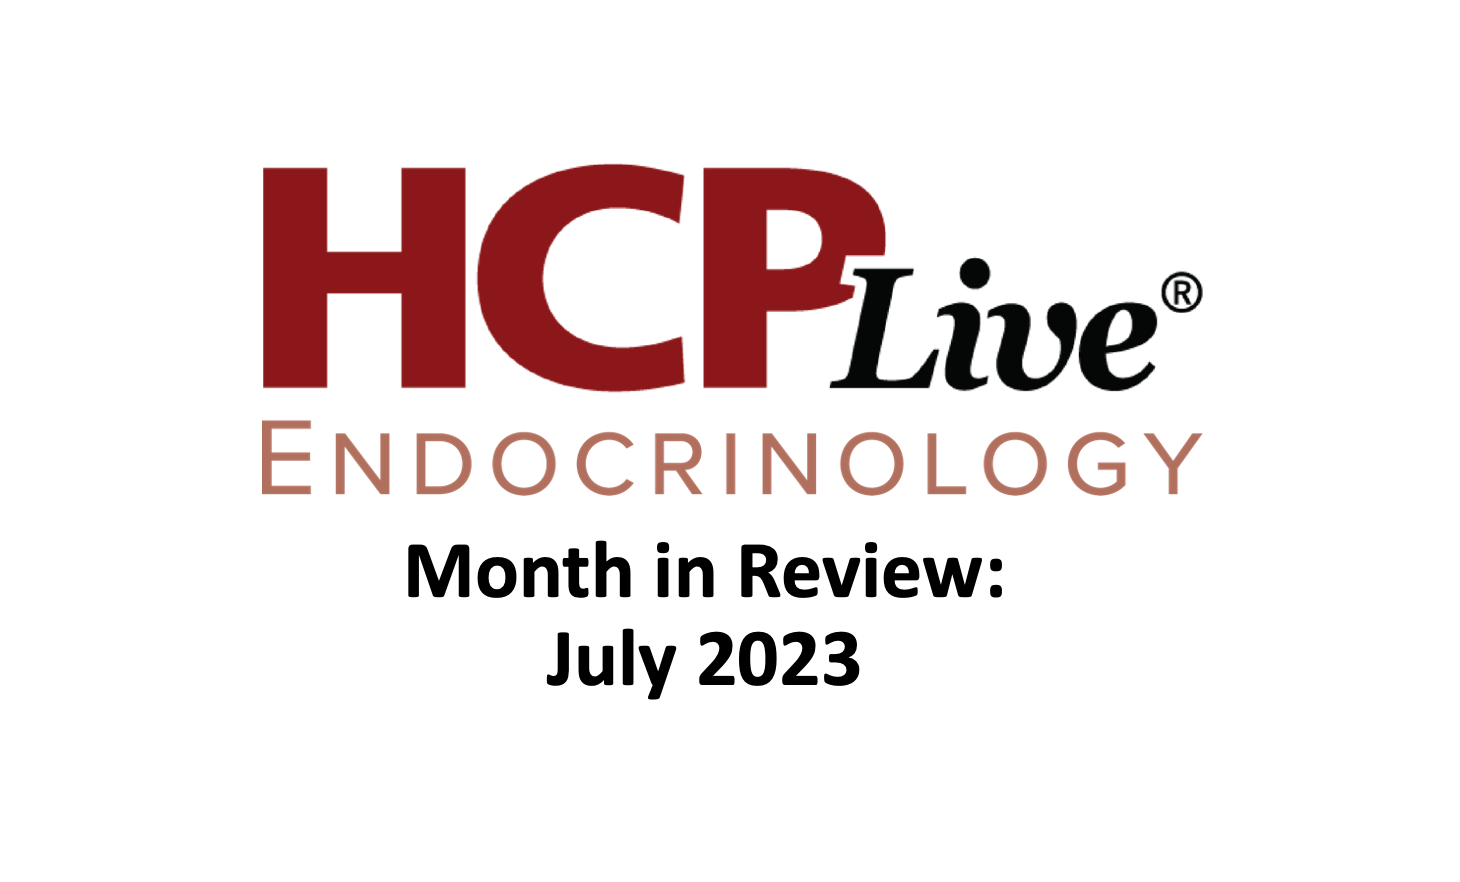 July 2023 Endocrinology Month in Review thumbnail featuring HCPLive Endocrinology logo.